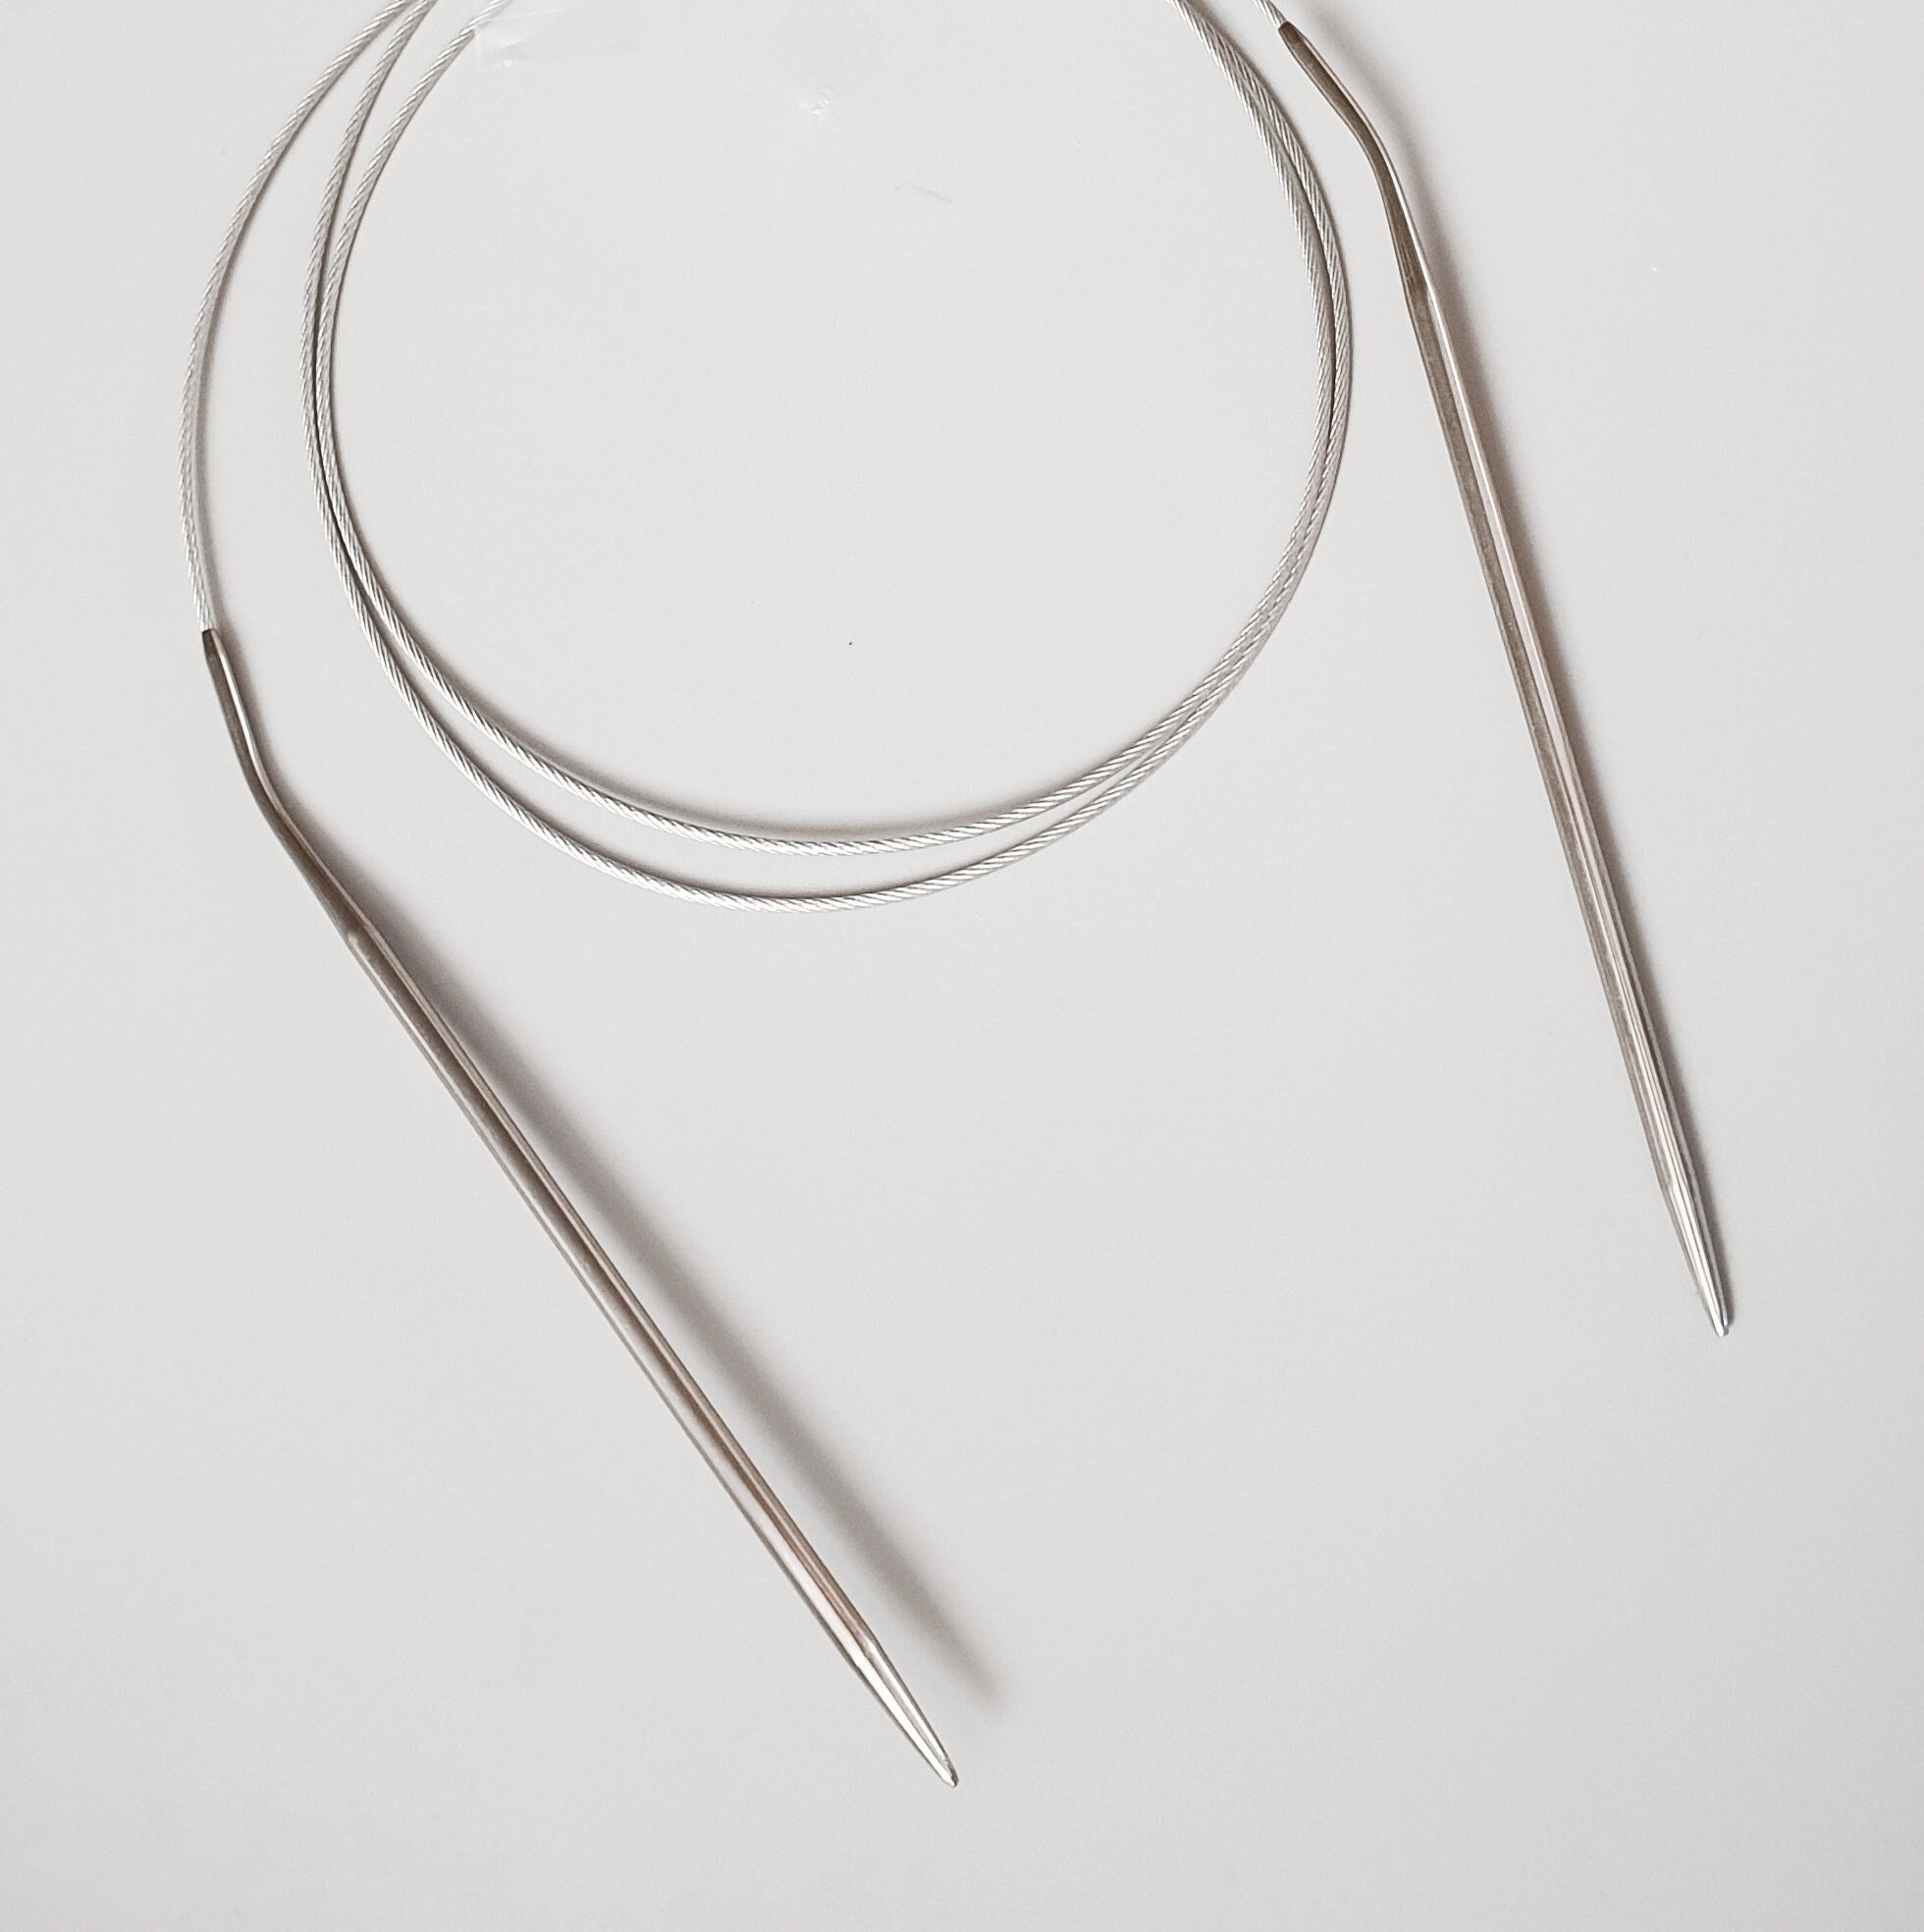 Curved Needle, Large, 6x.75 inches, Bead Spinner, Steel, 1 Needle,  Beadsmith, Priced per piece